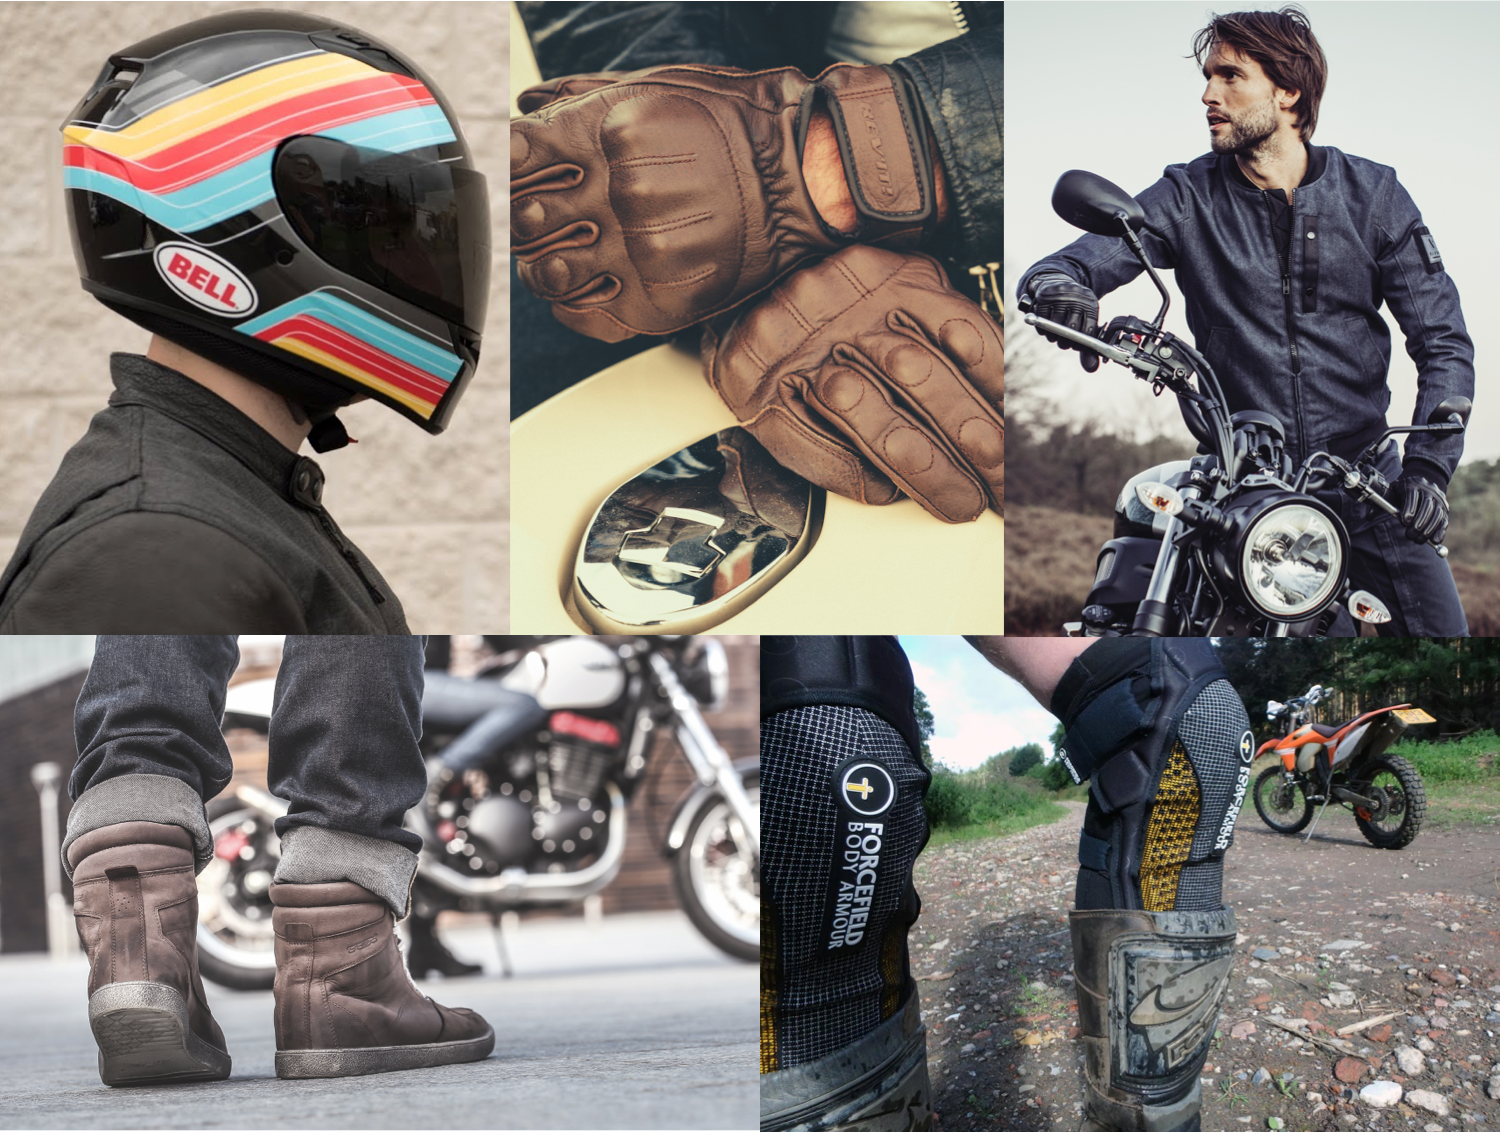 Beginner’s Guide to Riding Gear